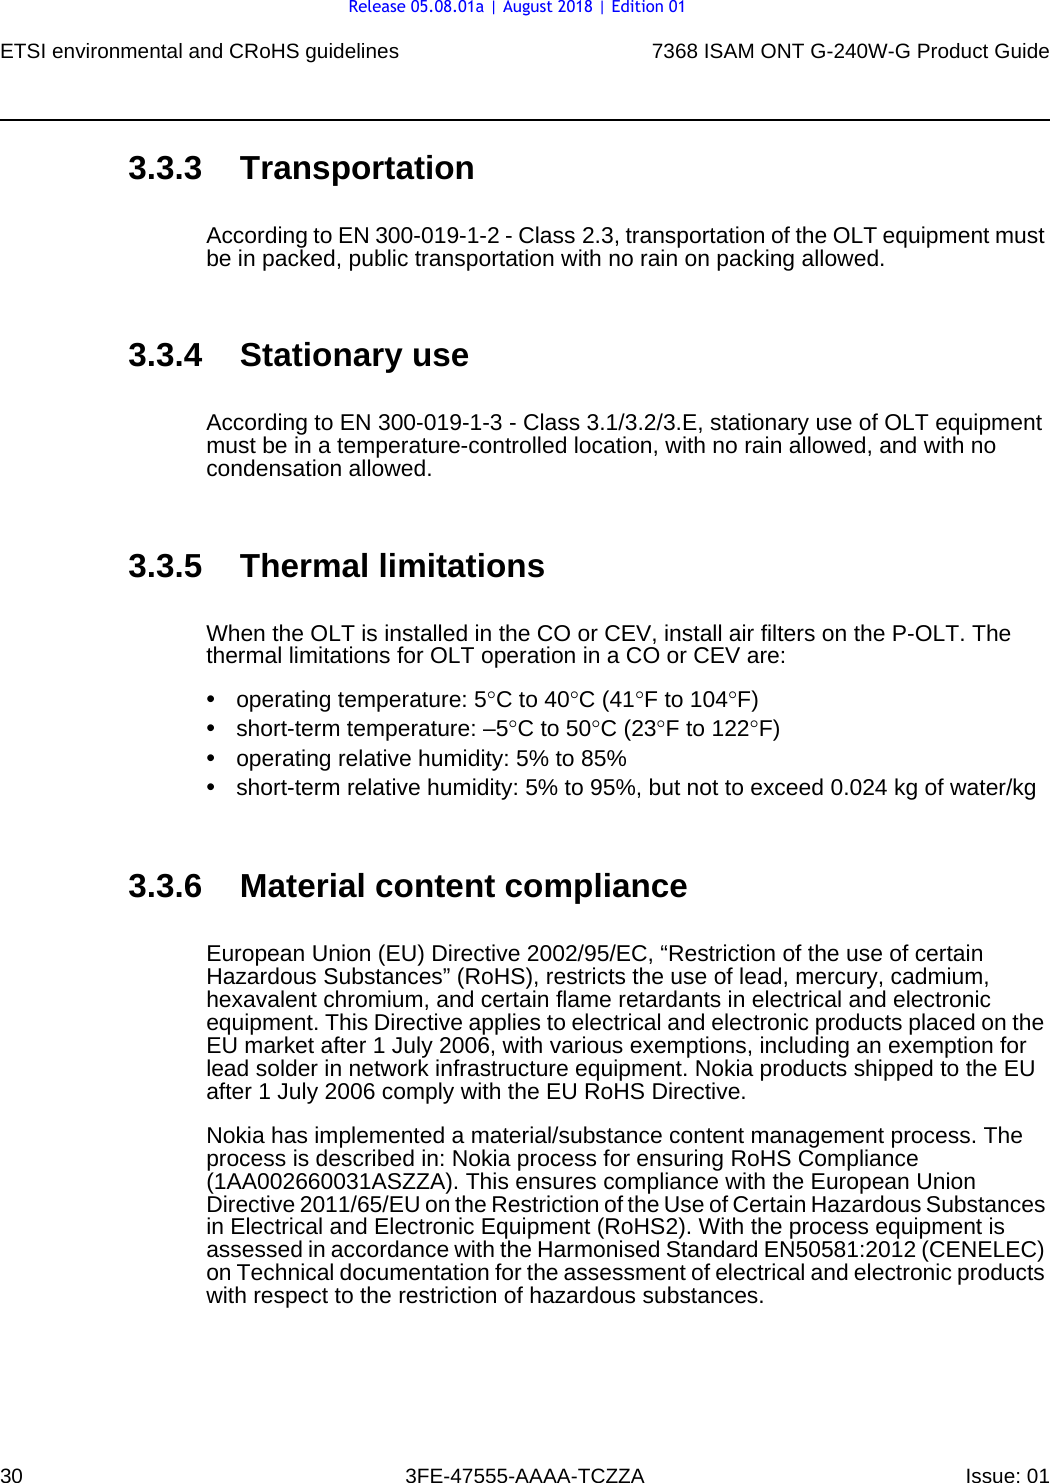 ETSI environmental and CRoHS guidelines307368 ISAM ONT G-240W-G Product Guide3FE-47555-AAAA-TCZZA Issue: 01 3.3.3 TransportationAccording to EN 300-019-1-2 - Class 2.3, transportation of the OLT equipment must be in packed, public transportation with no rain on packing allowed.3.3.4 Stationary useAccording to EN 300-019-1-3 - Class 3.1/3.2/3.E, stationary use of OLT equipment must be in a temperature-controlled location, with no rain allowed, and with no condensation allowed.3.3.5 Thermal limitationsWhen the OLT is installed in the CO or CEV, install air filters on the P-OLT. The thermal limitations for OLT operation in a CO or CEV are:•operating temperature: 5°C to 40°C (41°F to 104°F)•short-term temperature: –5°C to 50°C (23°F to 122°F)•operating relative humidity: 5% to 85%•short-term relative humidity: 5% to 95%, but not to exceed 0.024 kg of water/kg3.3.6 Material content complianceEuropean Union (EU) Directive 2002/95/EC, “Restriction of the use of certain Hazardous Substances” (RoHS), restricts the use of lead, mercury, cadmium, hexavalent chromium, and certain flame retardants in electrical and electronic equipment. This Directive applies to electrical and electronic products placed on the EU market after 1 July 2006, with various exemptions, including an exemption for lead solder in network infrastructure equipment. Nokia products shipped to the EU after 1 July 2006 comply with the EU RoHS Directive.Nokia has implemented a material/substance content management process. The process is described in: Nokia process for ensuring RoHS Compliance (1AA002660031ASZZA). This ensures compliance with the European Union Directive 2011/65/EU on the Restriction of the Use of Certain Hazardous Substances in Electrical and Electronic Equipment (RoHS2). With the process equipment is assessed in accordance with the Harmonised Standard EN50581:2012 (CENELEC) on Technical documentation for the assessment of electrical and electronic products with respect to the restriction of hazardous substances.Release 05.08.01a | August 2018 | Edition 01